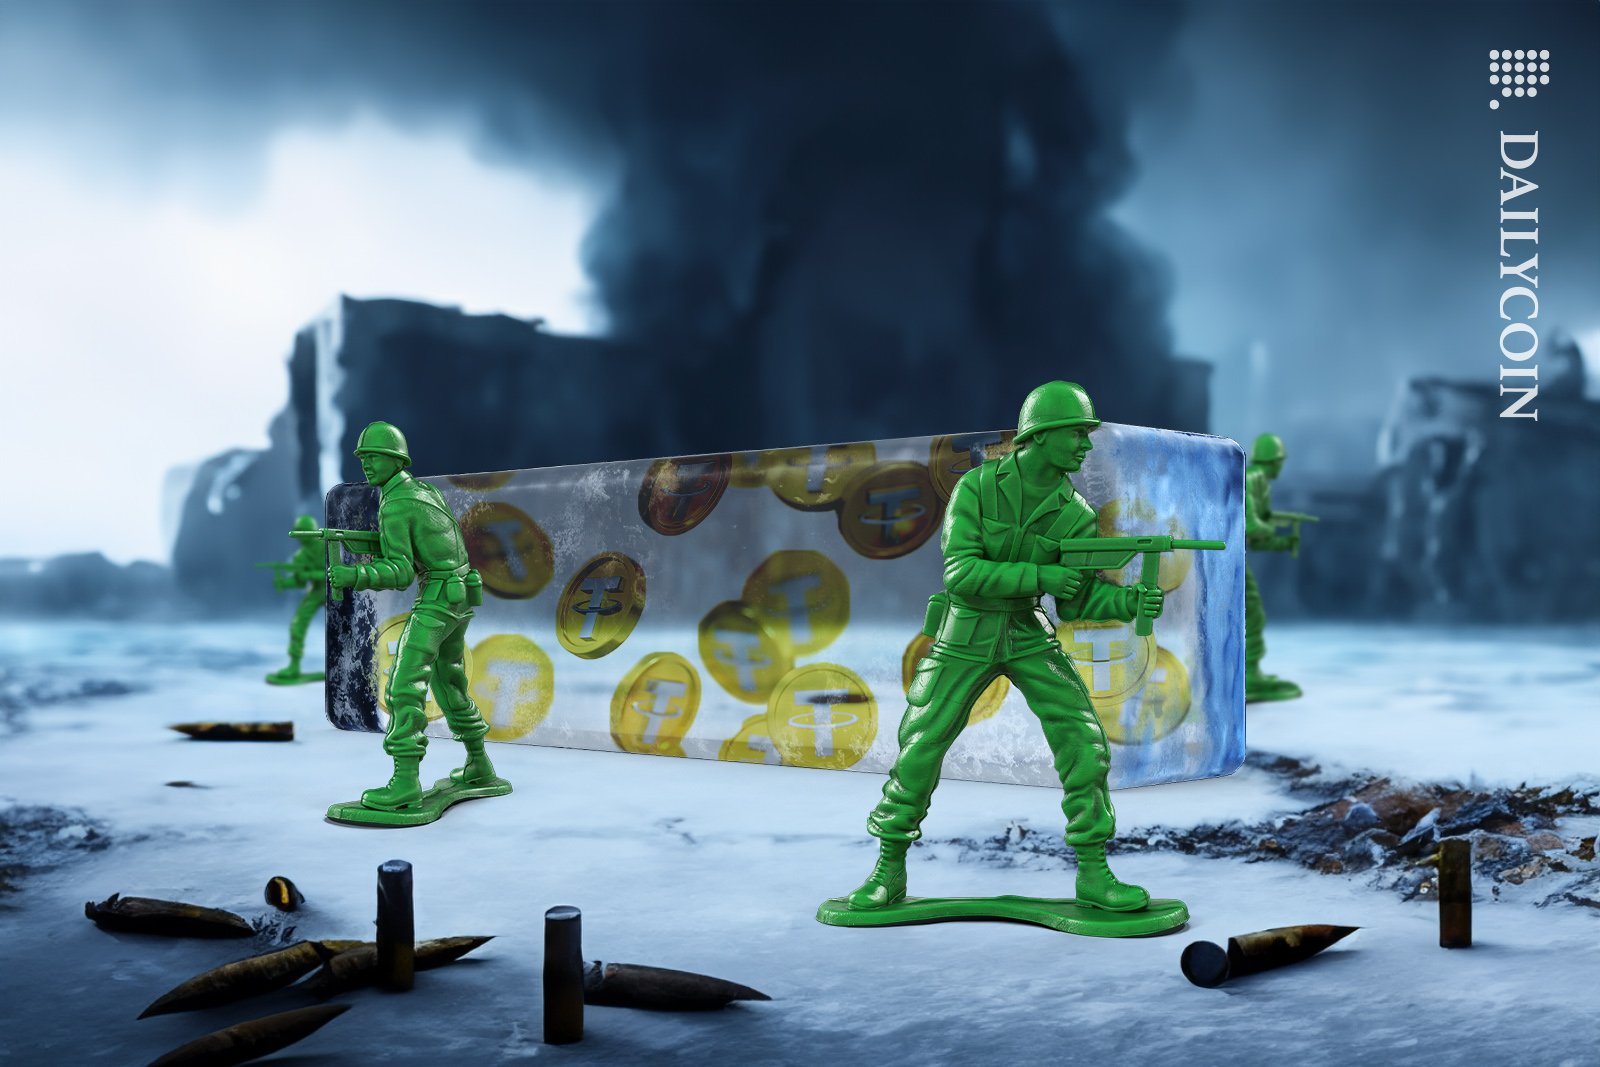 Little green toy soldiers protecting the frozen Tether coins.